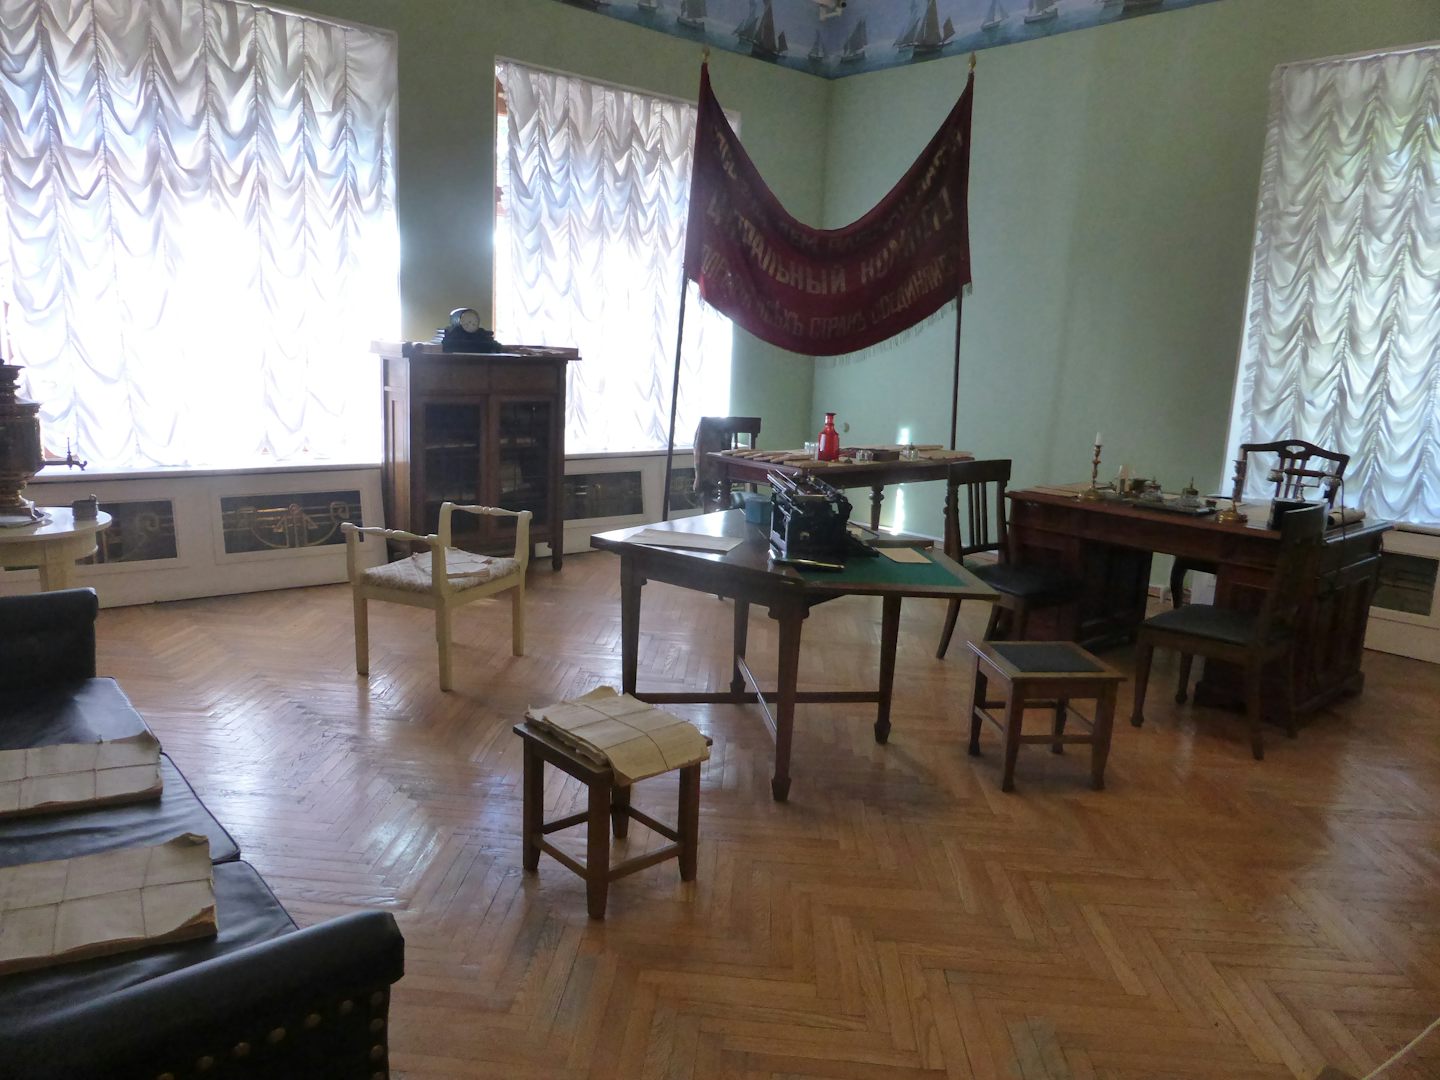 St Petersburg. Museum of Political History. Lenin's Office. Aug 2016